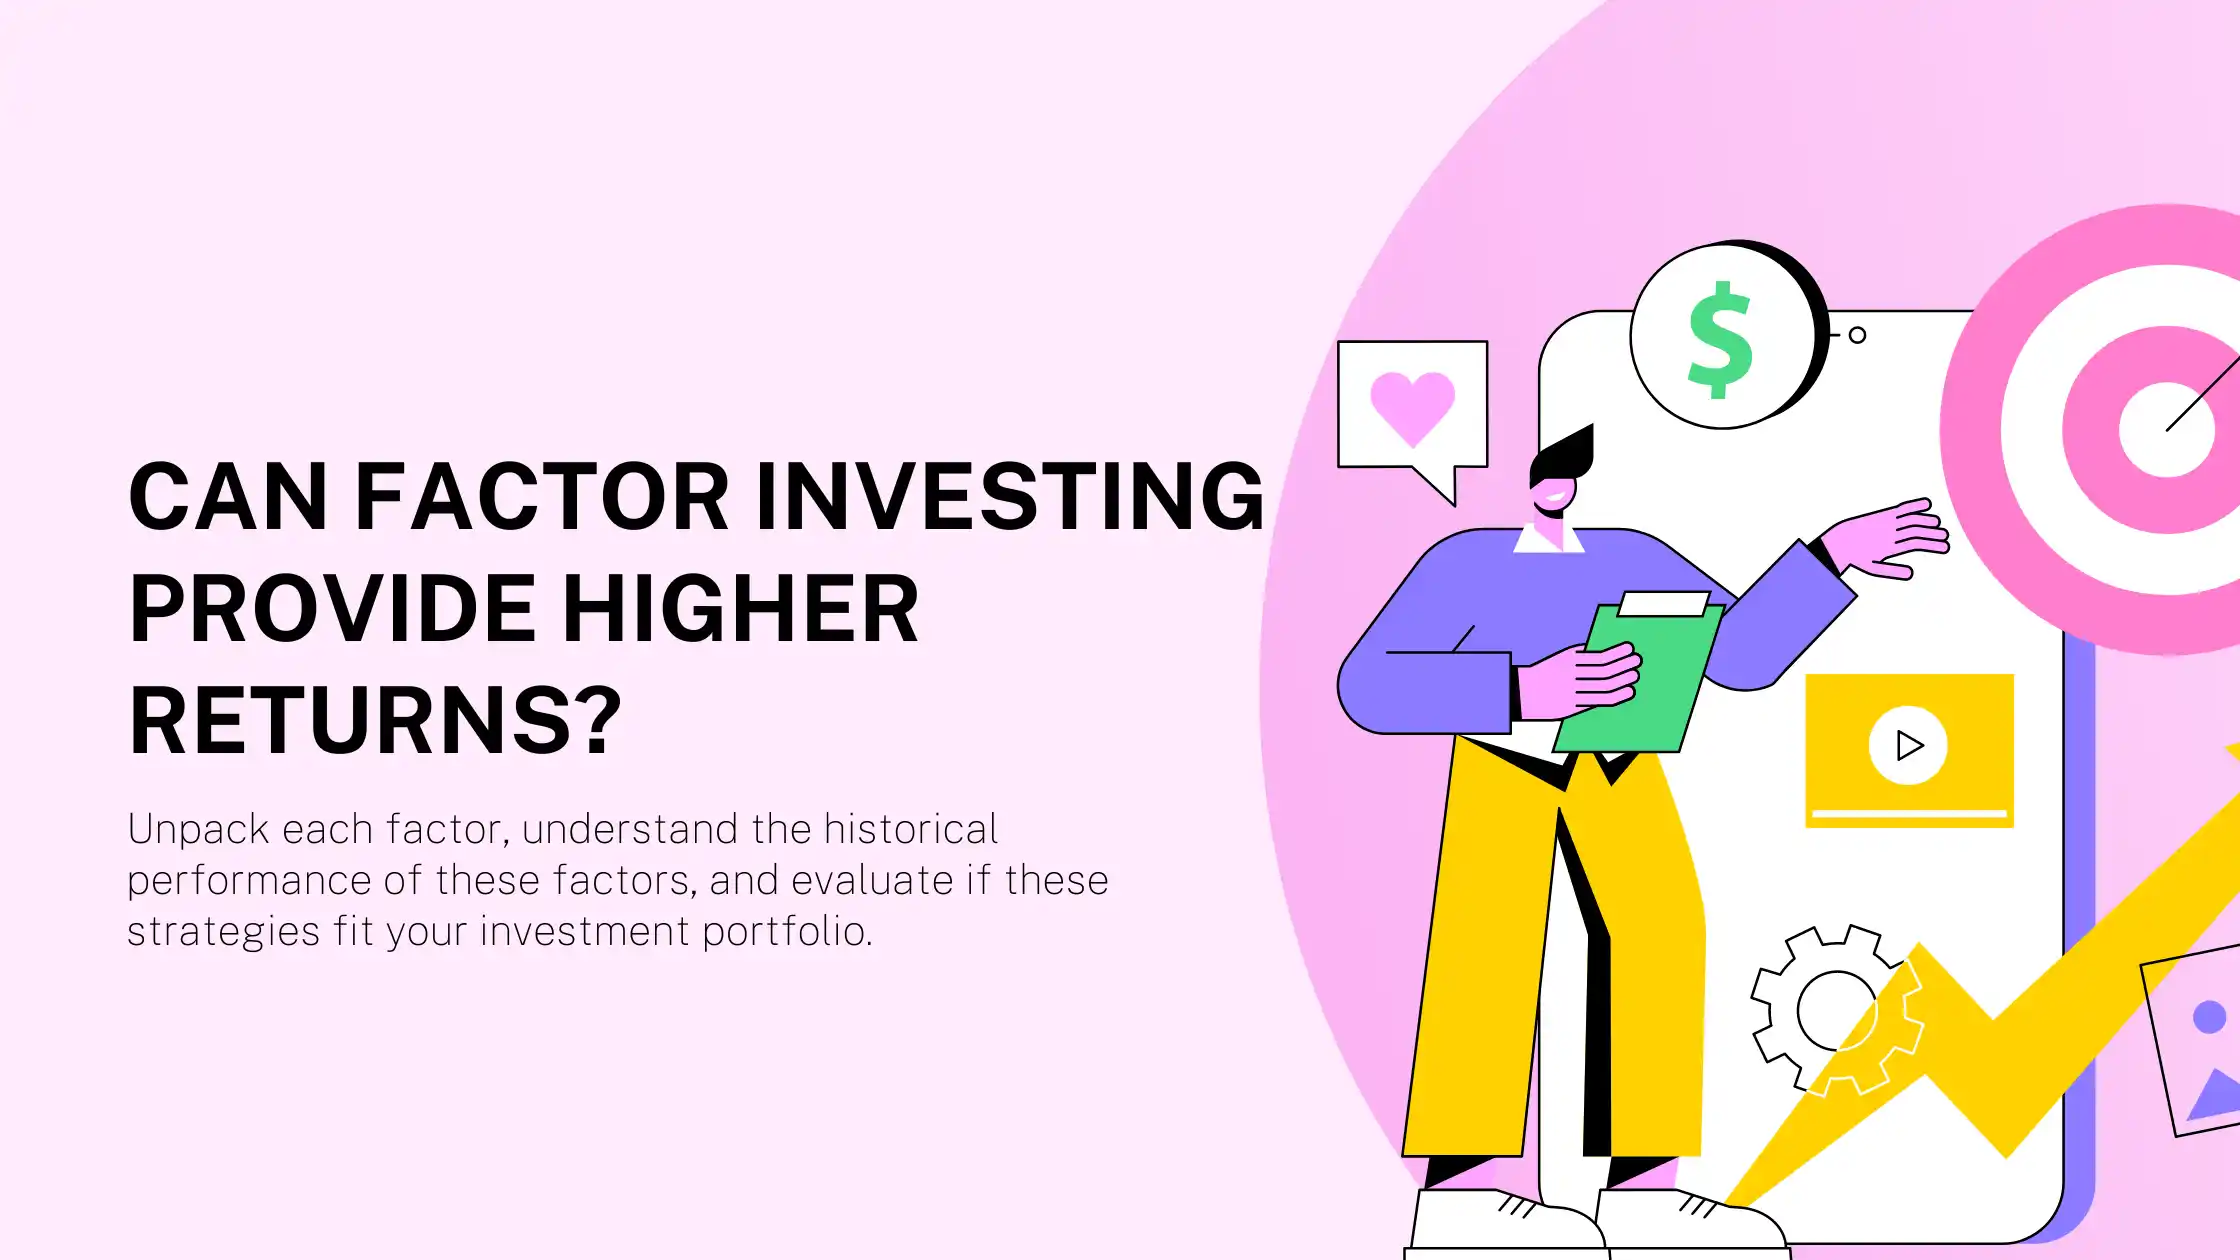 Can Factor Investing provide higher returns?